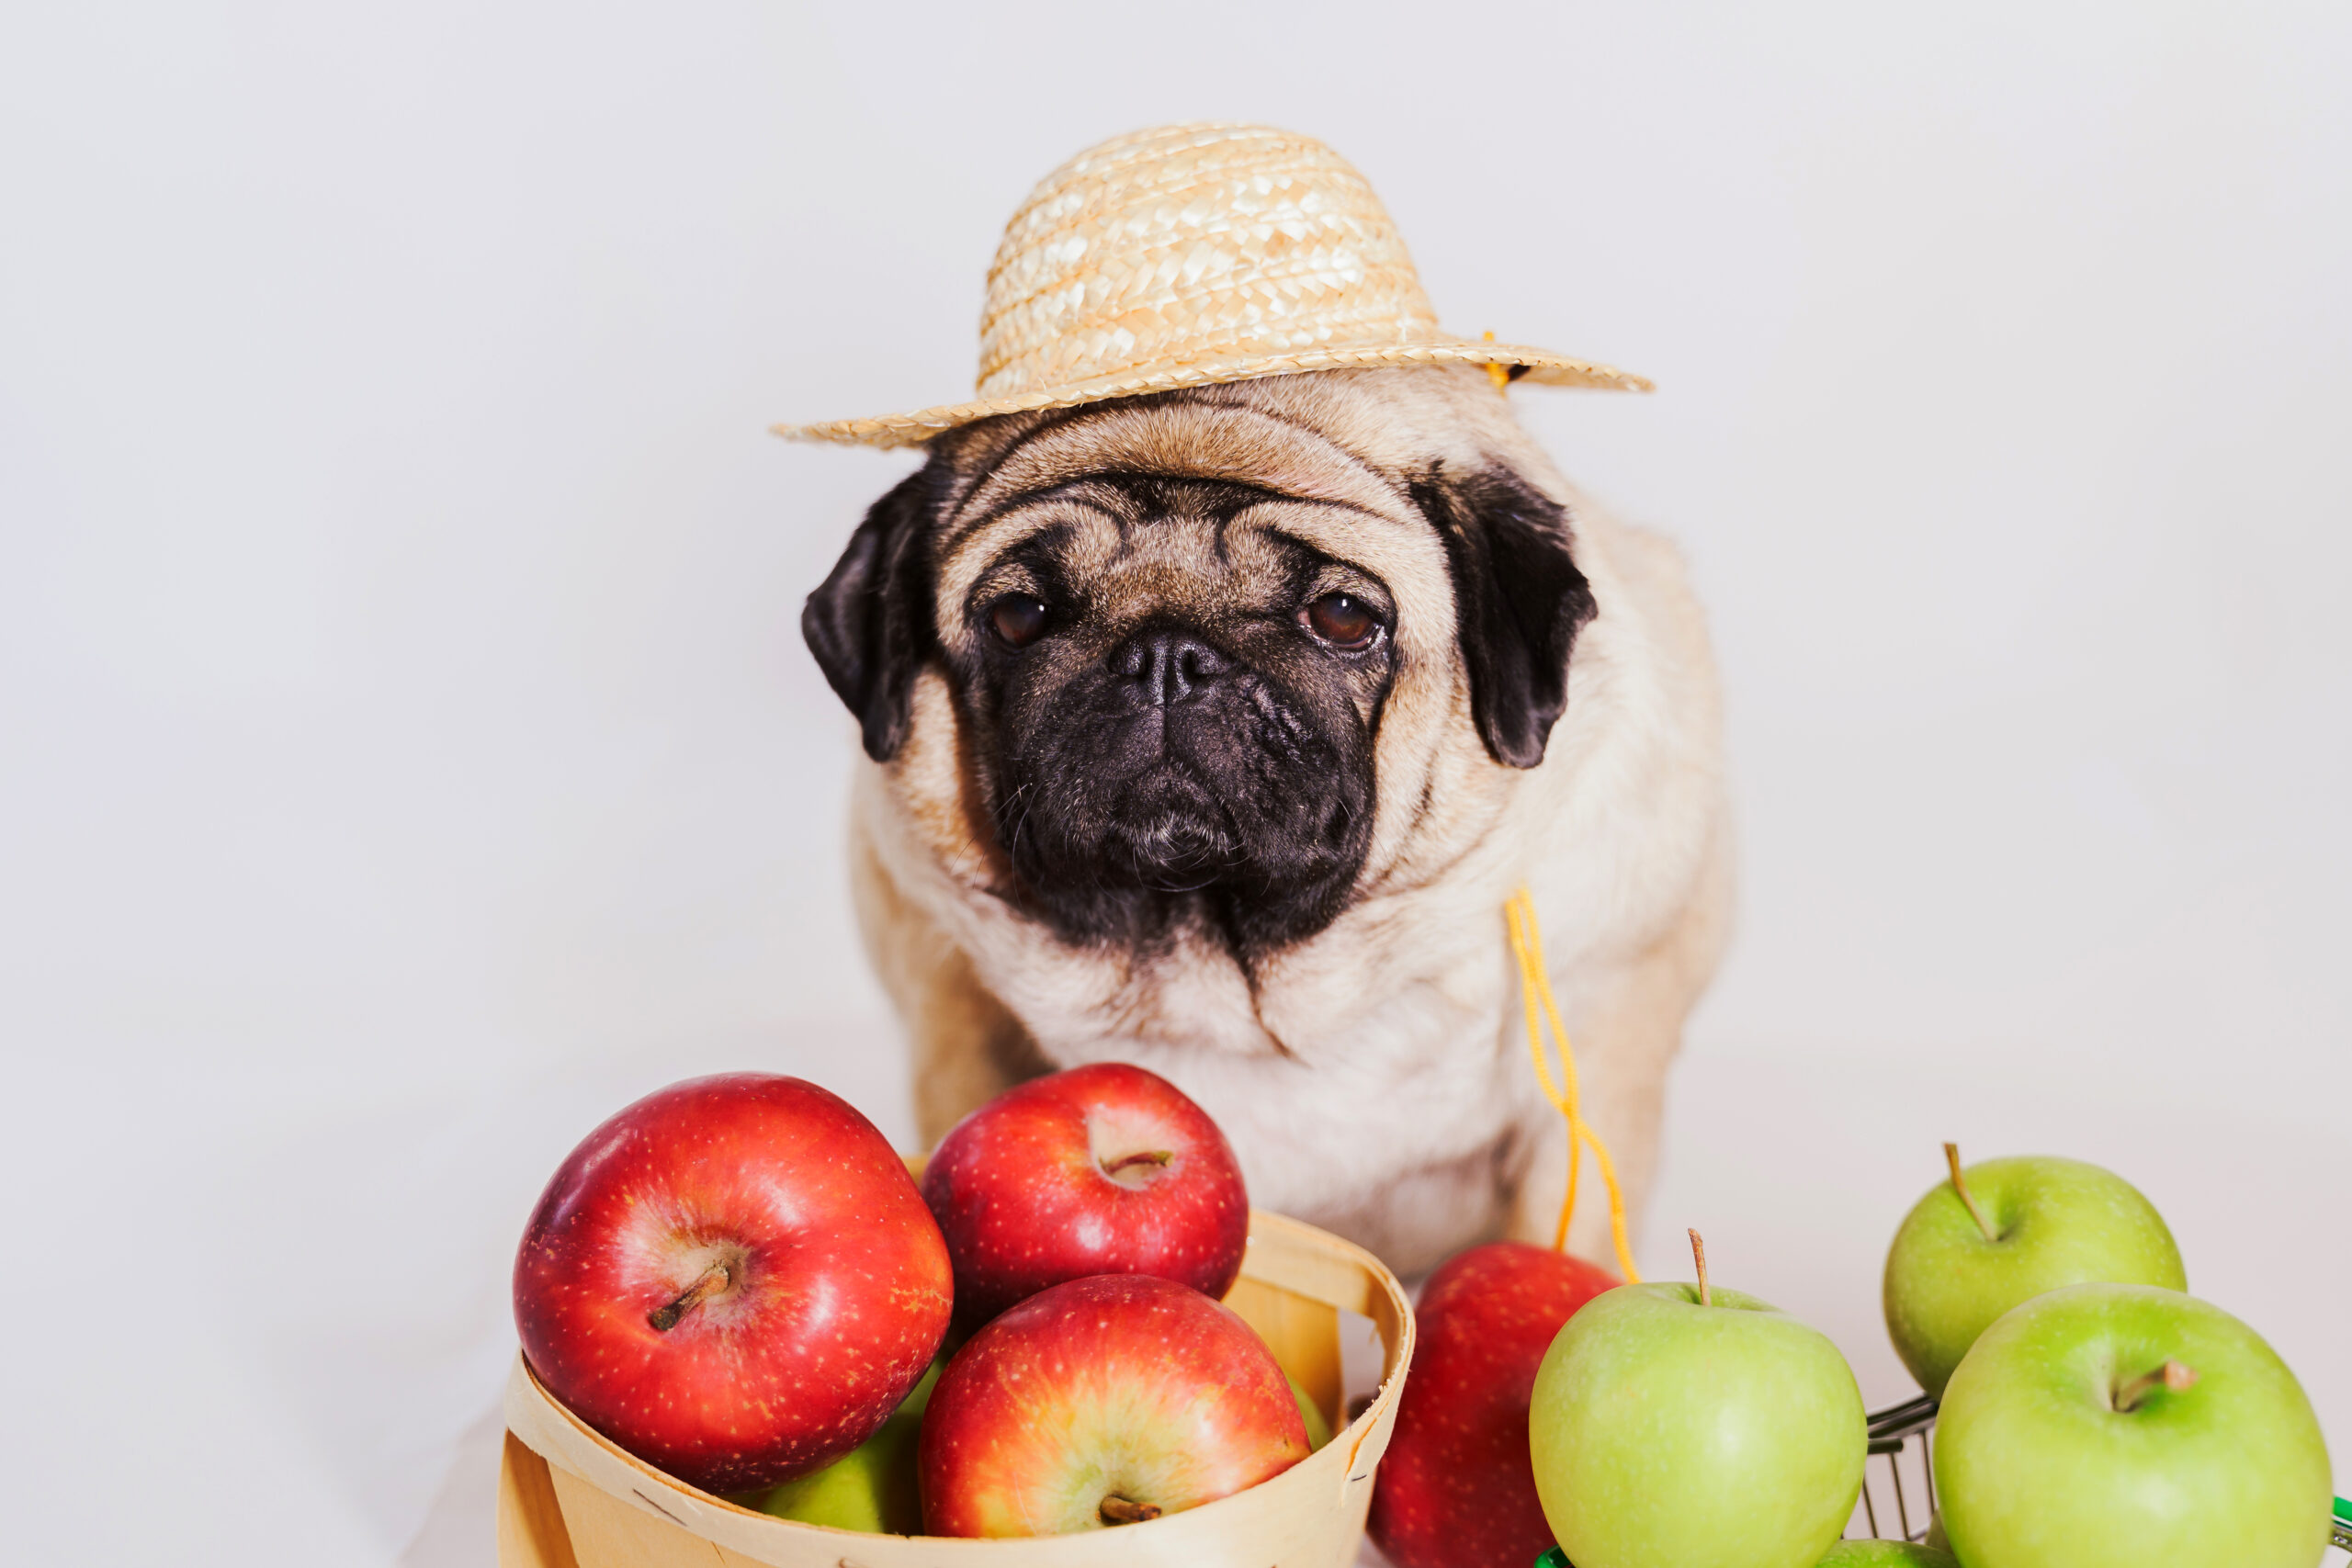 Close up of tired cute pug with red and green apples on orange background. Relaxed dog in straw hat with fruits after harvest. Concept of agriculture and organic food.